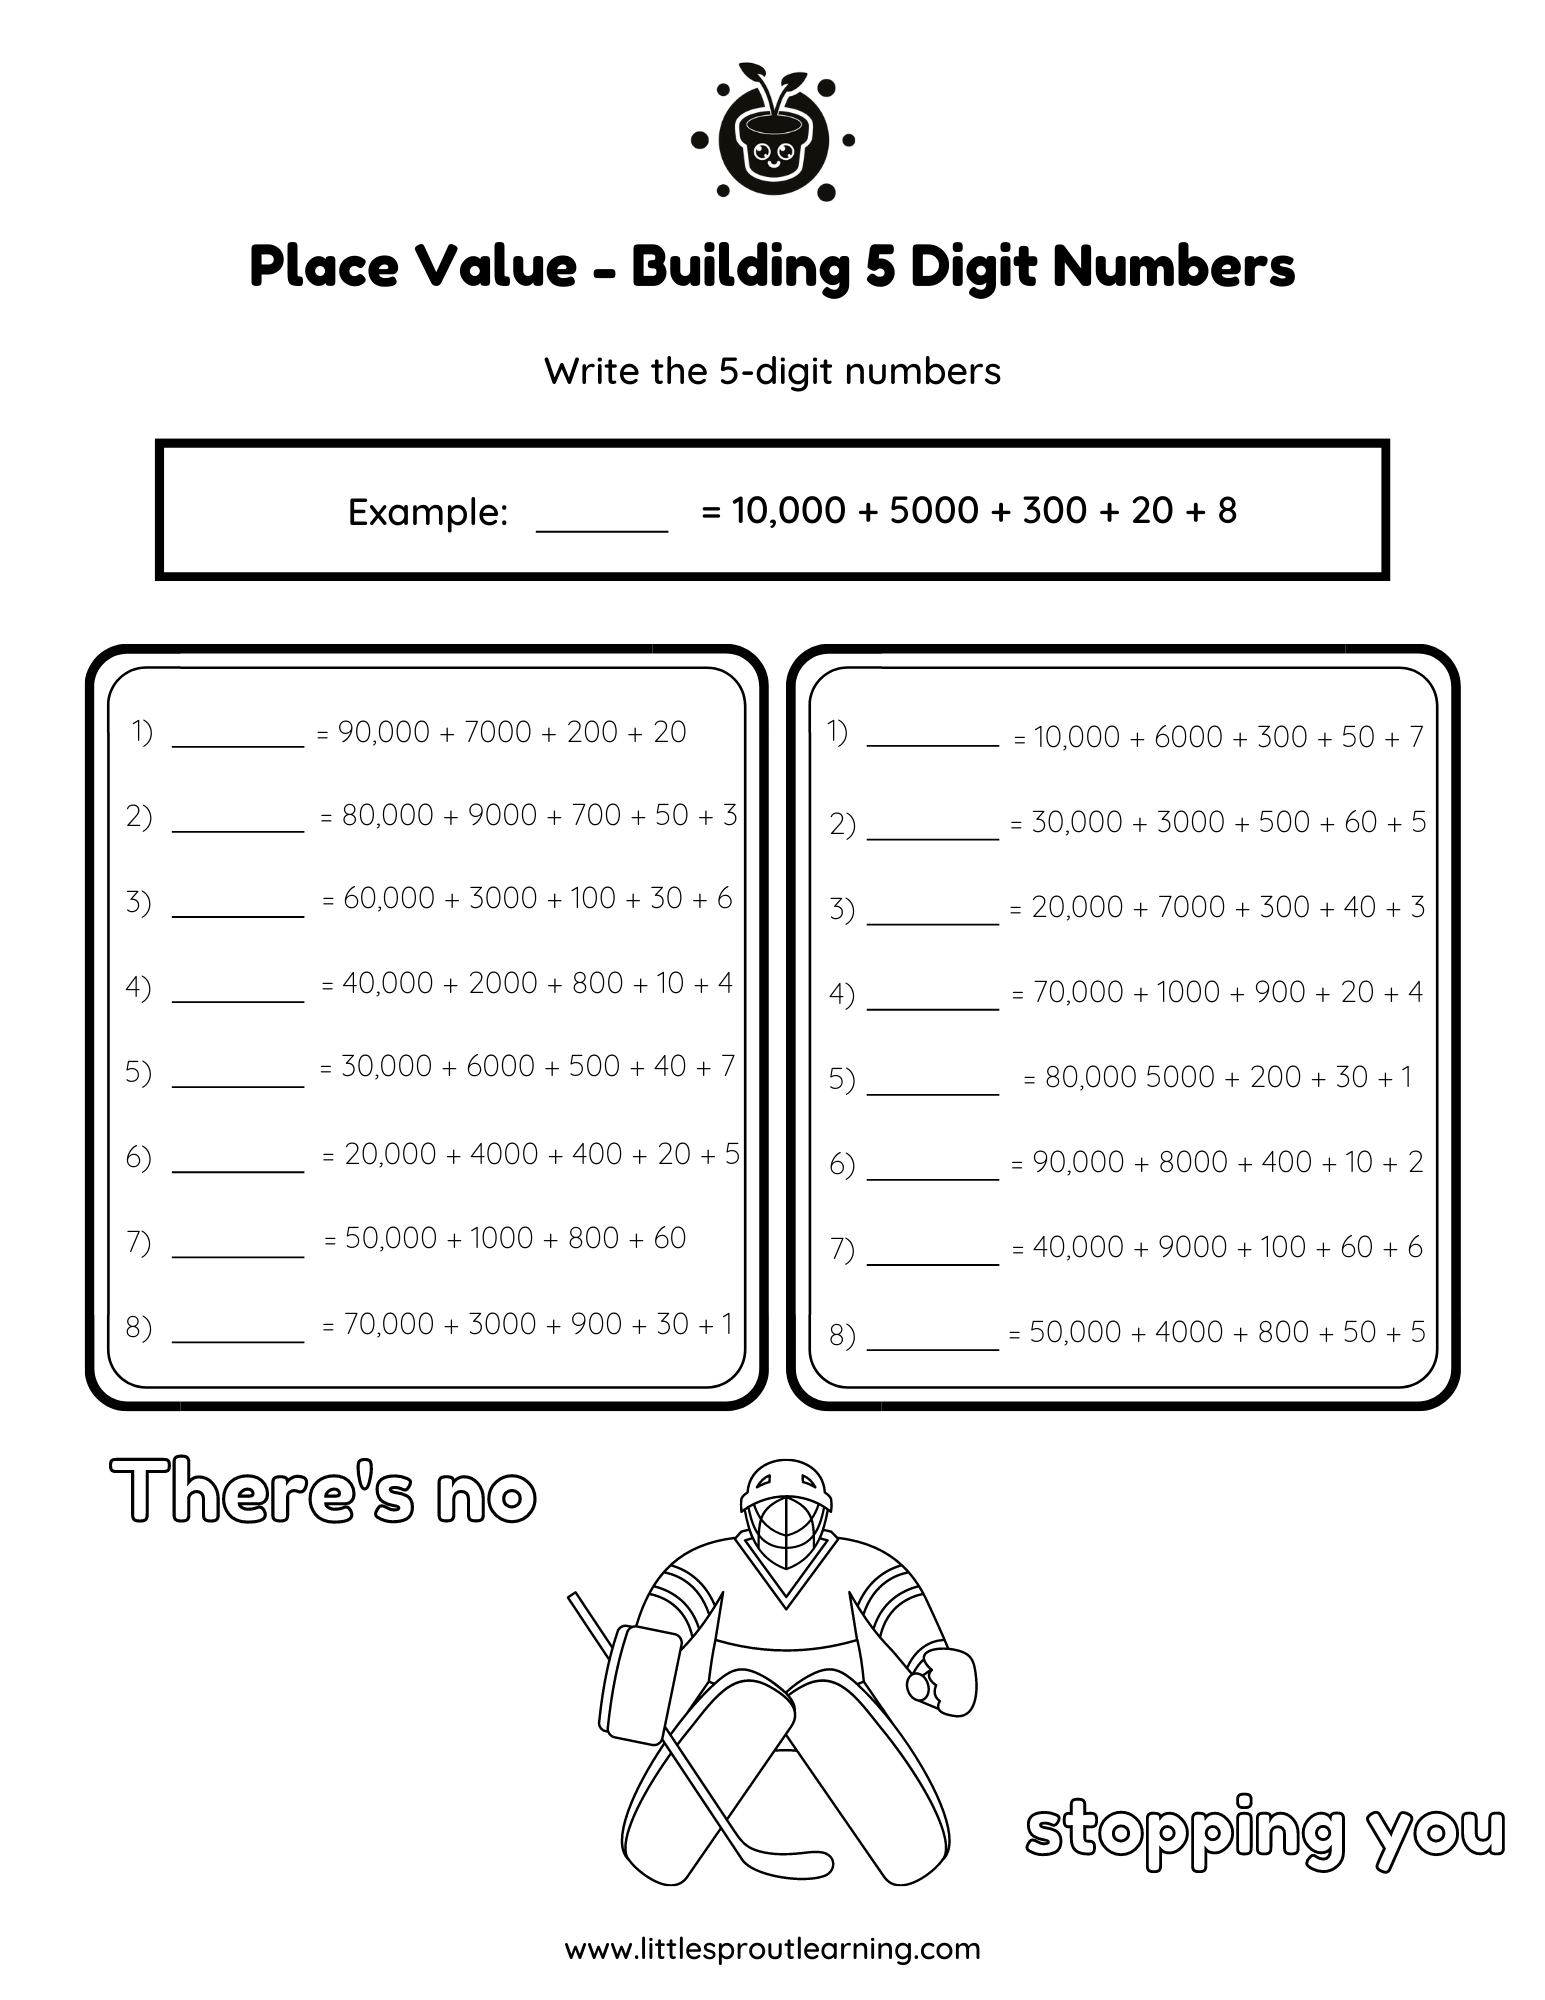 Link to Math Practice Worksheet for Place Values in building 5 digit numbers